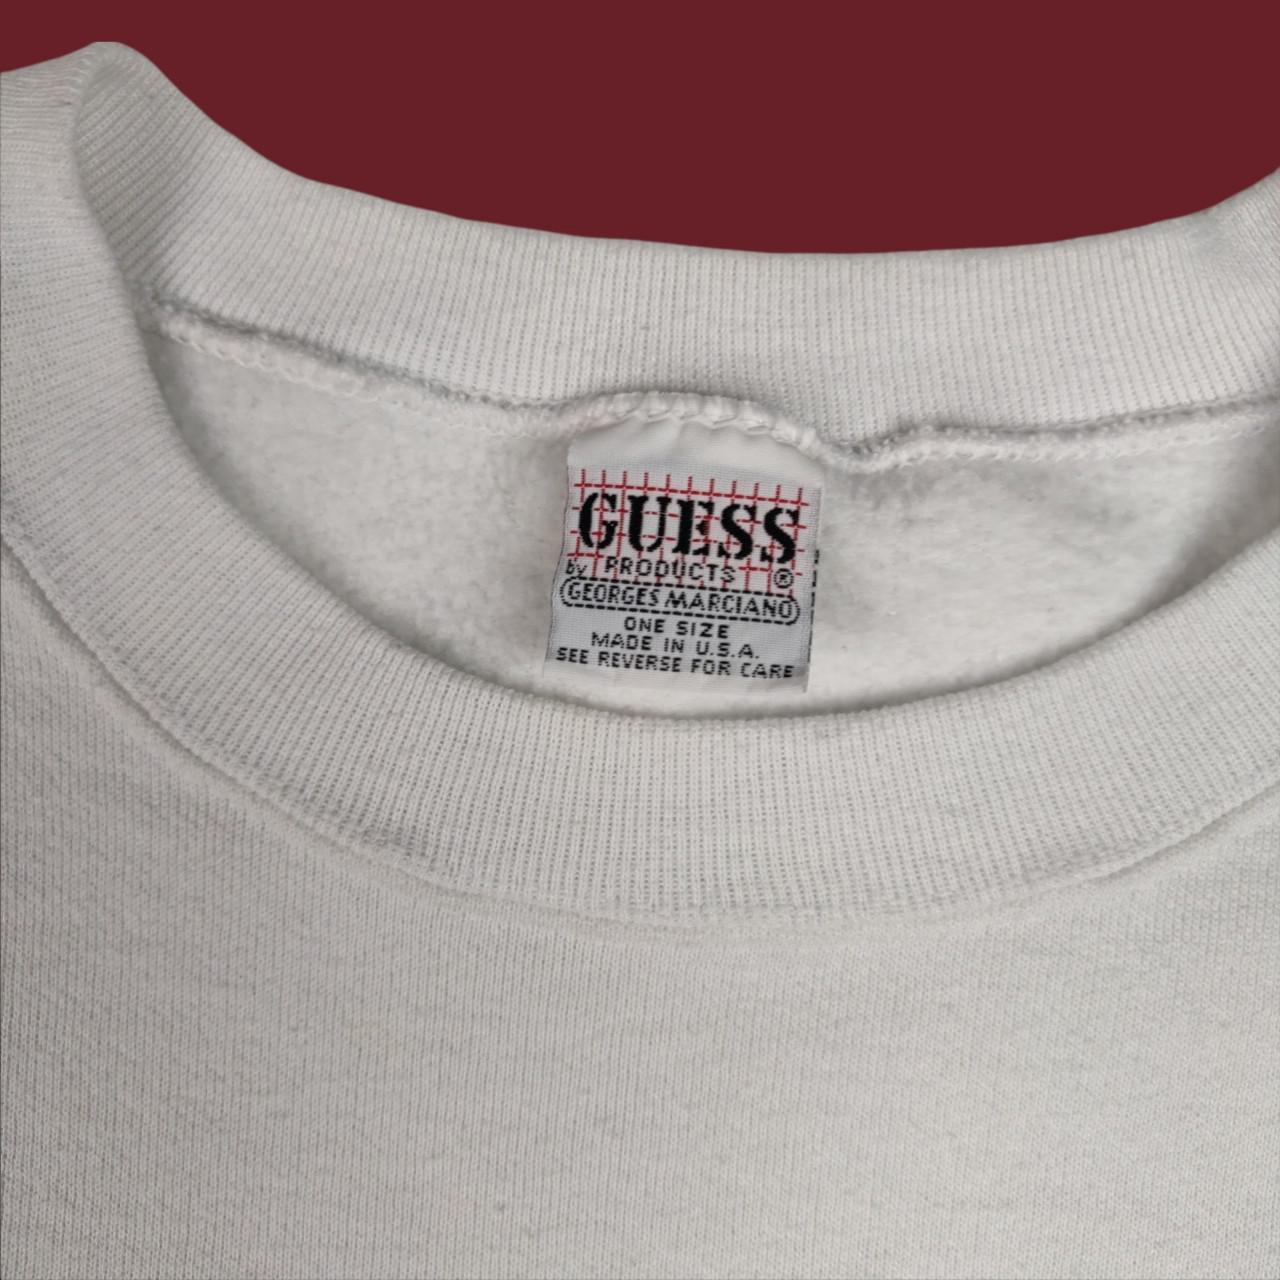 Guess Men's White and Pink Sweatshirt (4)